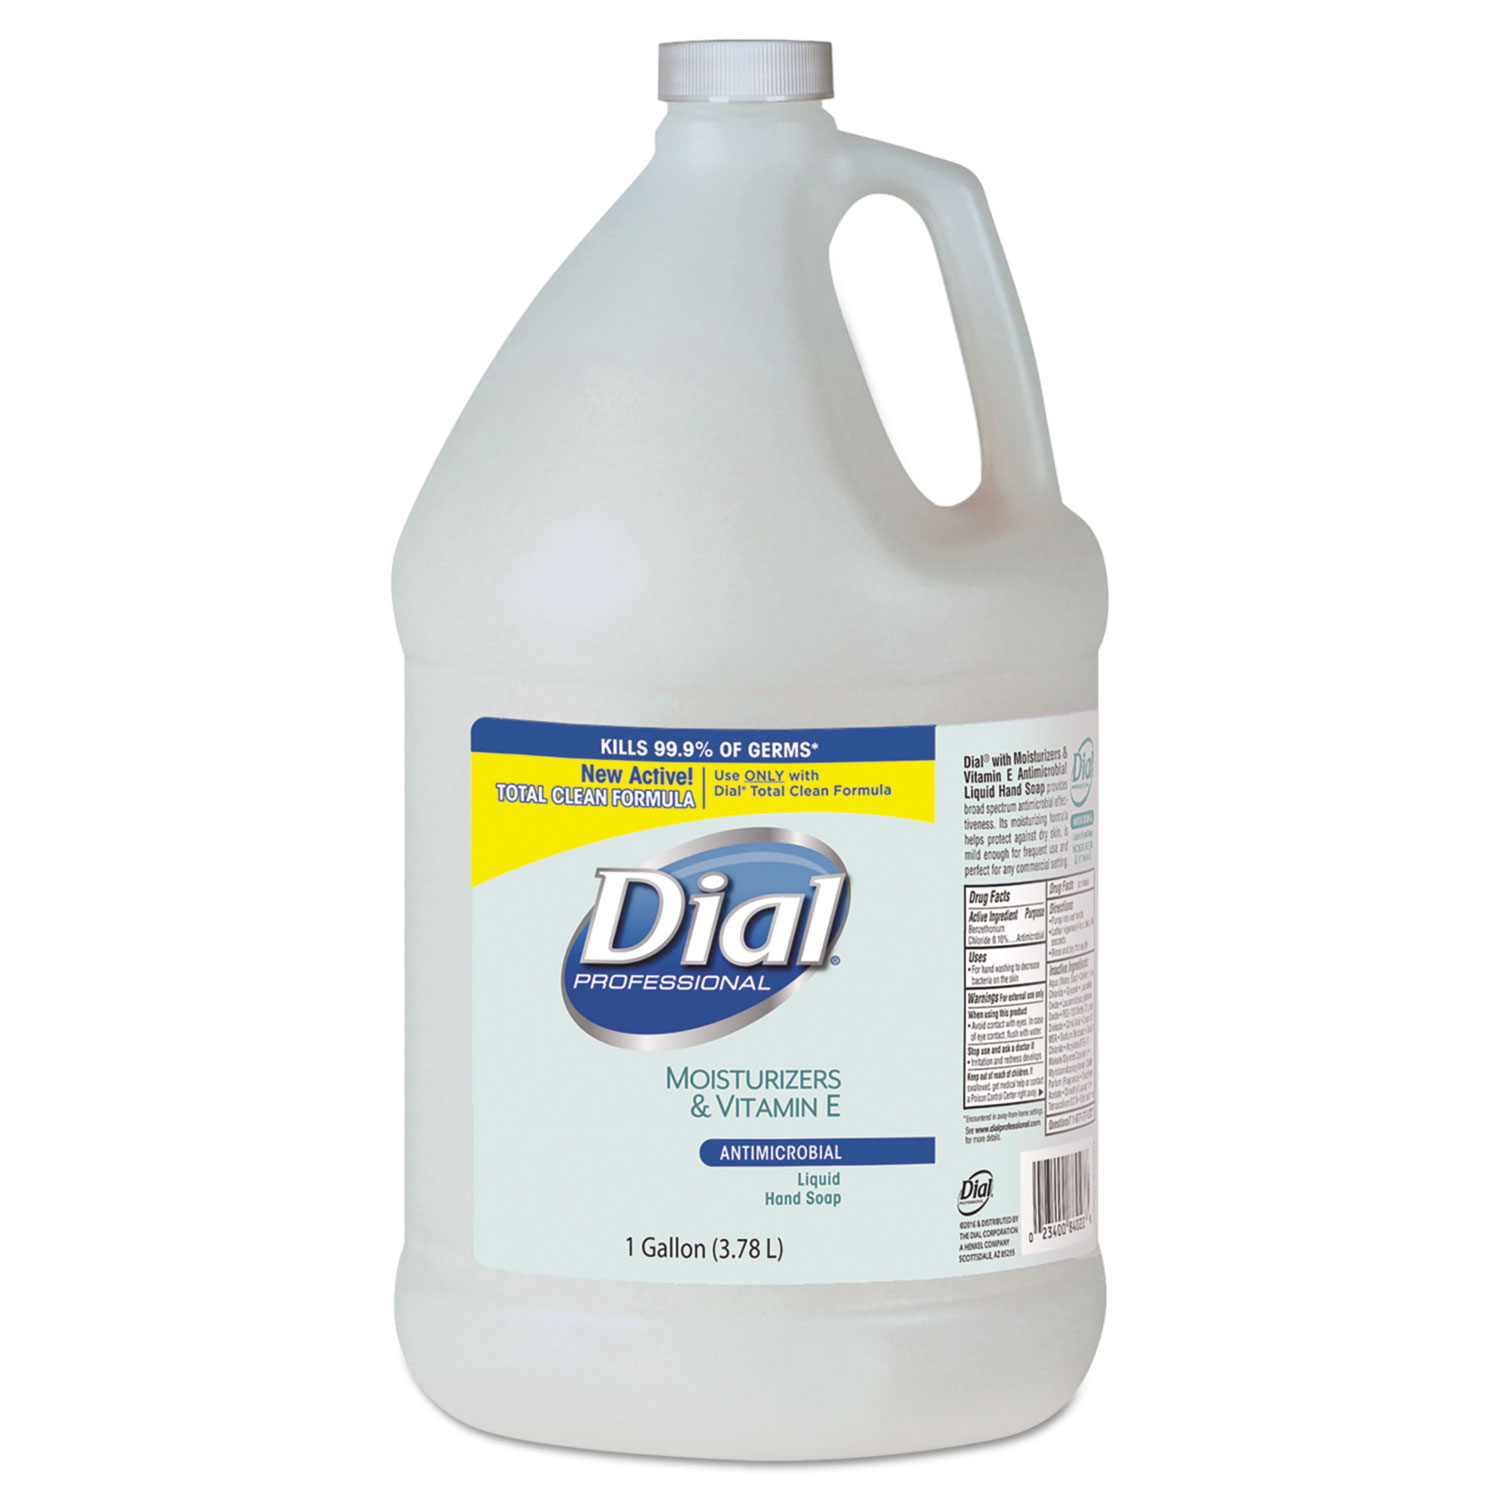  Dial Professional DIA 84022 Antimicrobial Soap with Moisturizers, 1gal Bottle, 4/Carton (DIA84022) 